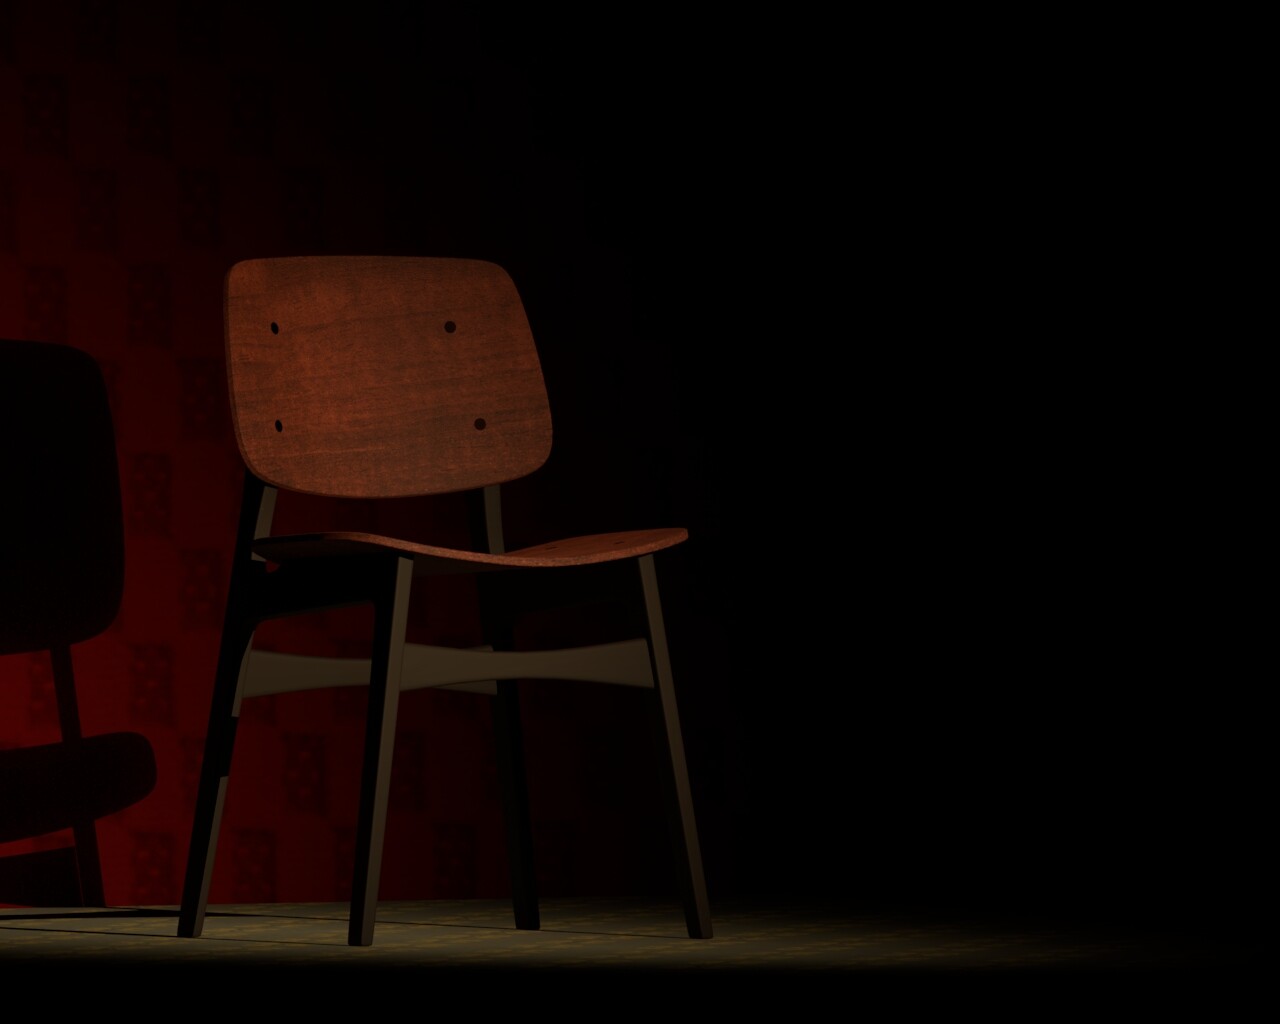 ArtStation - chair with table.